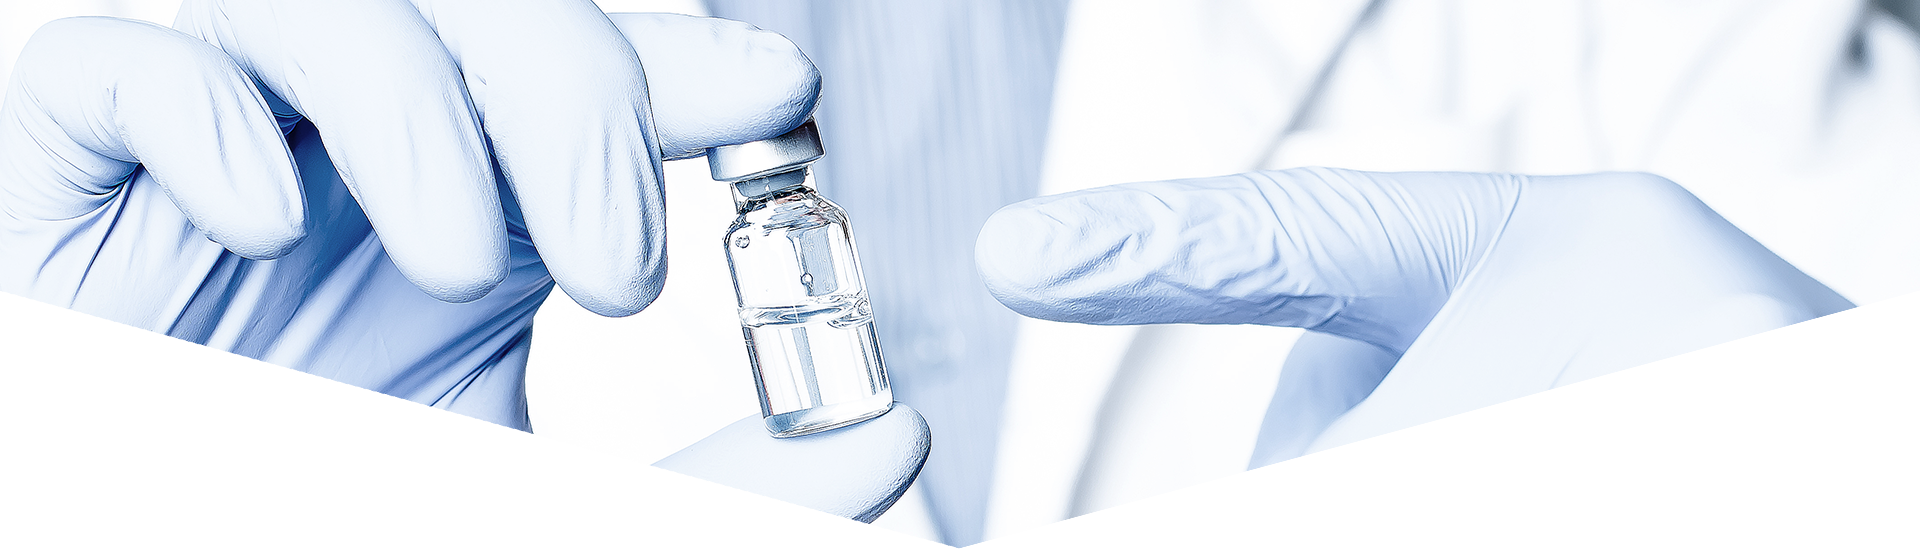 Bcn-vaccine - Bottled Water (1920x549), Png Download